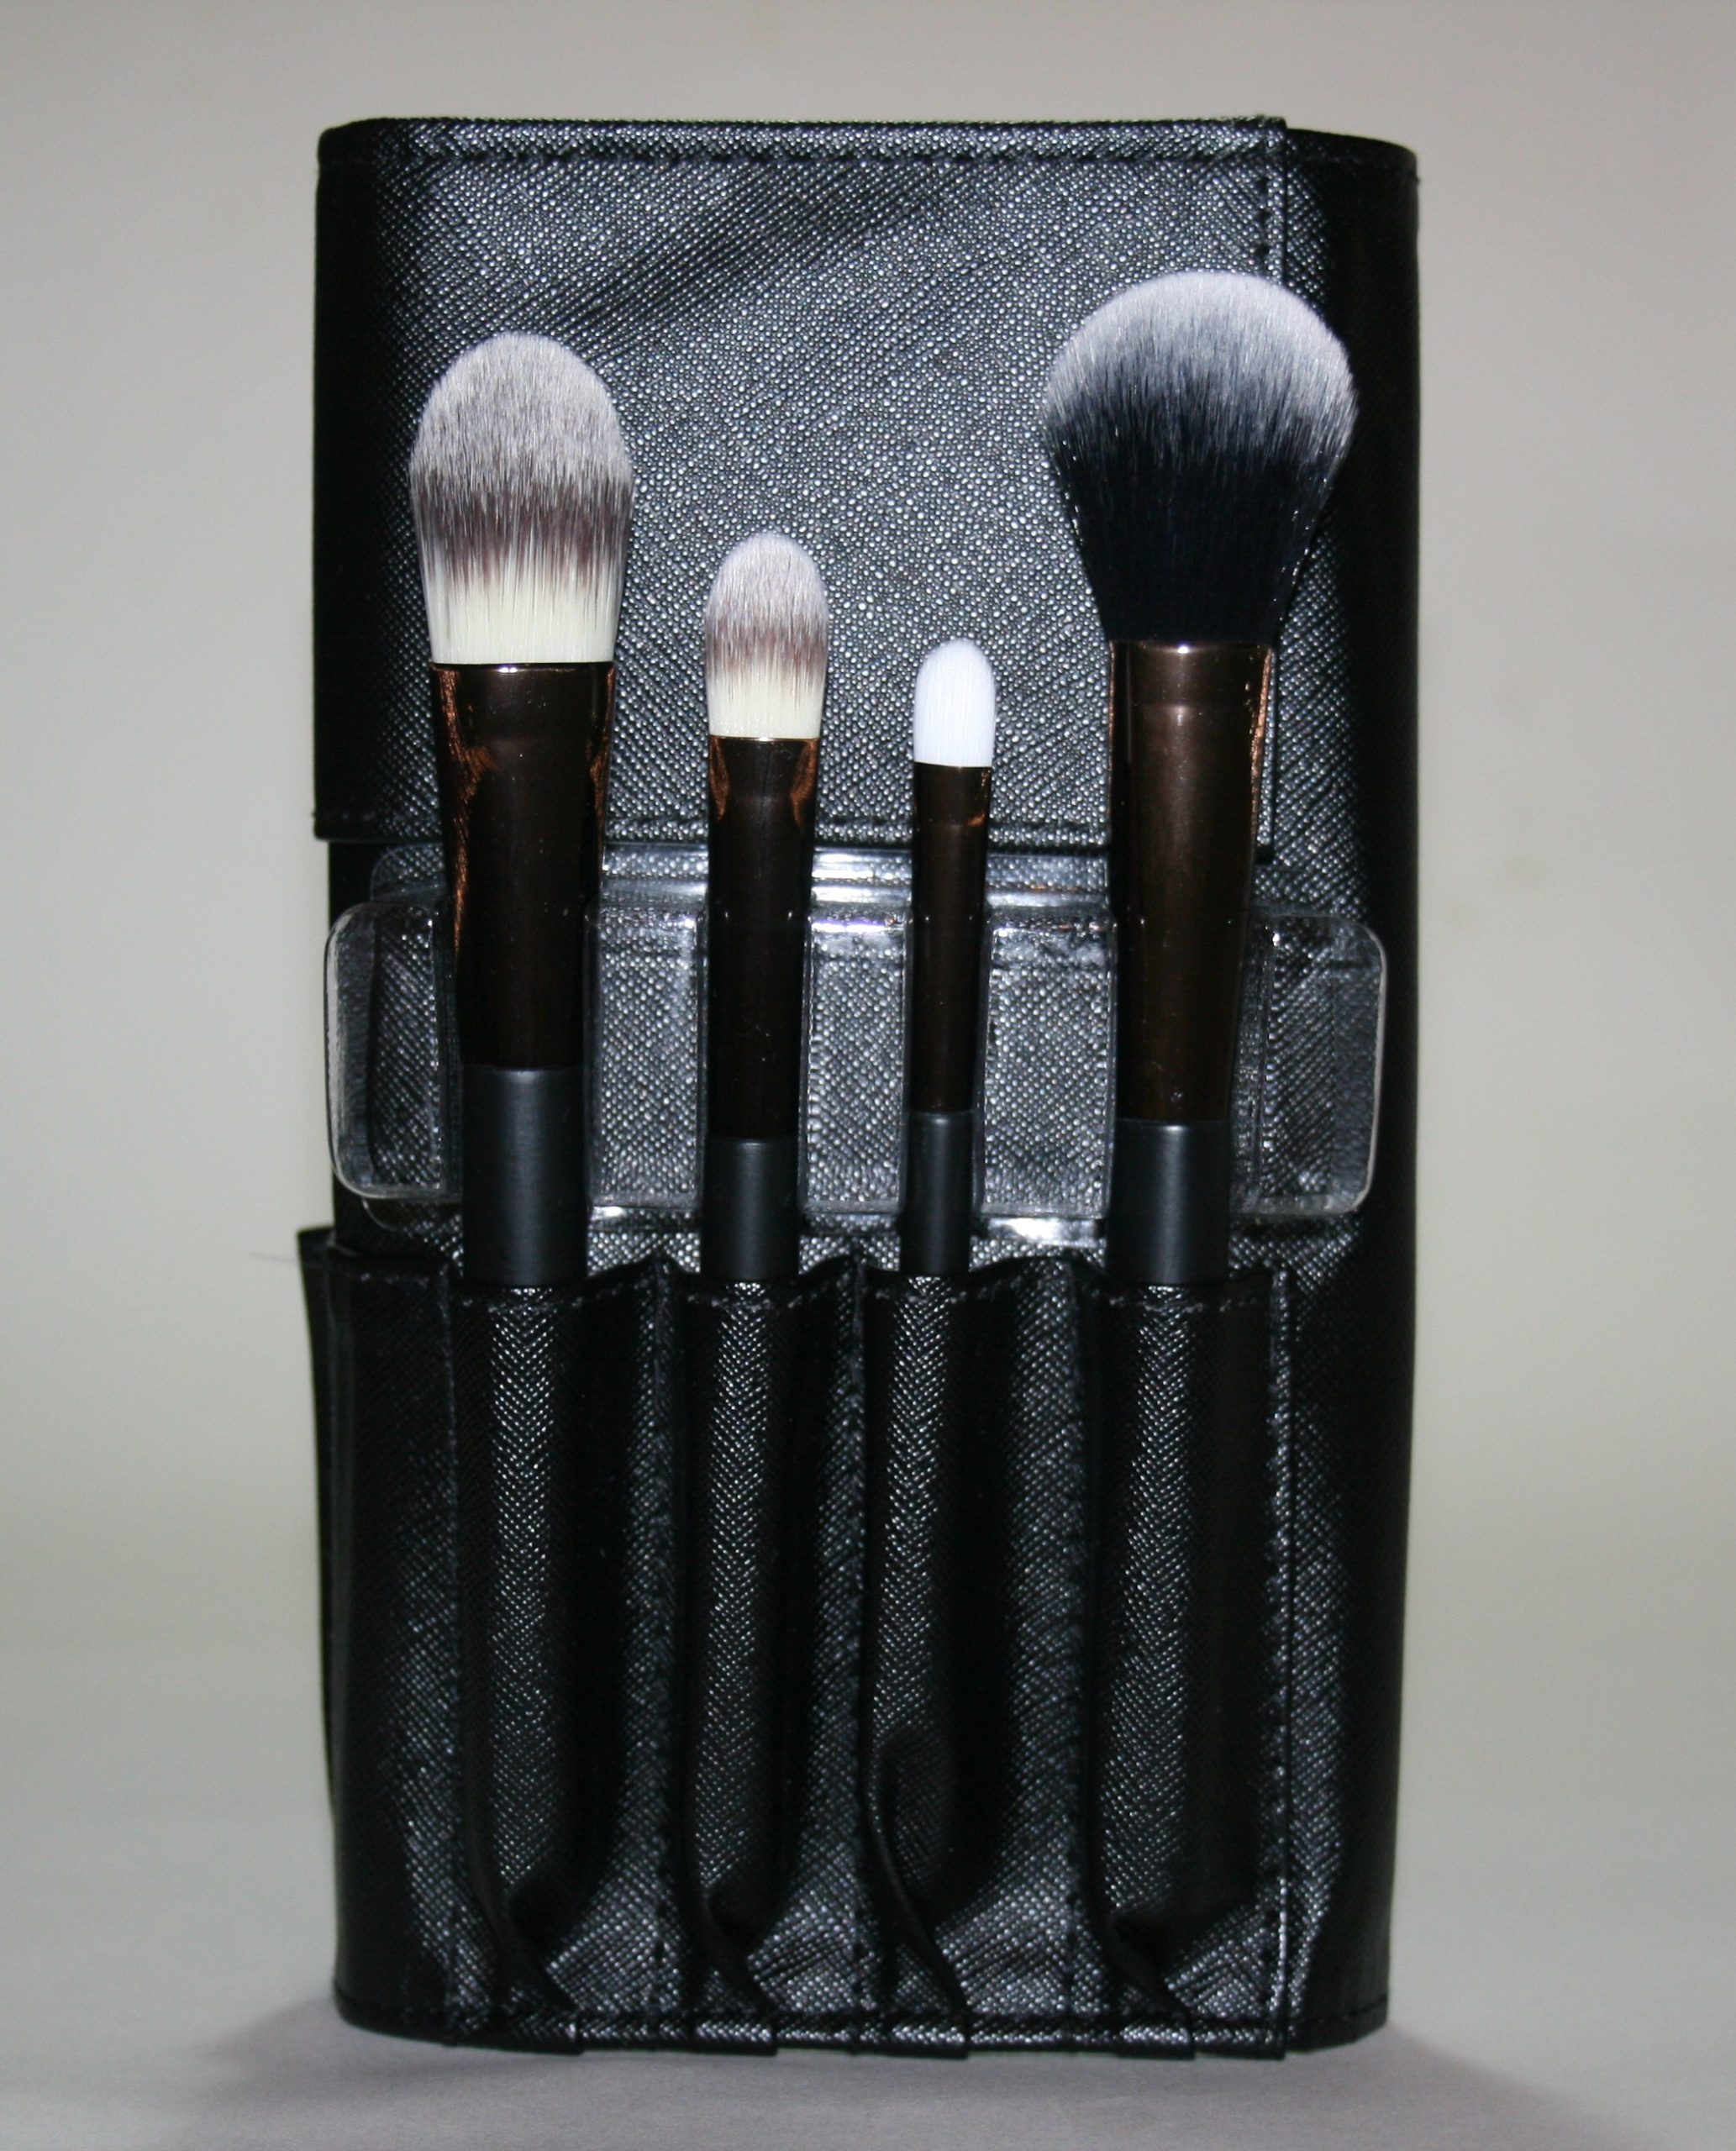 Boots No7 Core Collection Brush Set